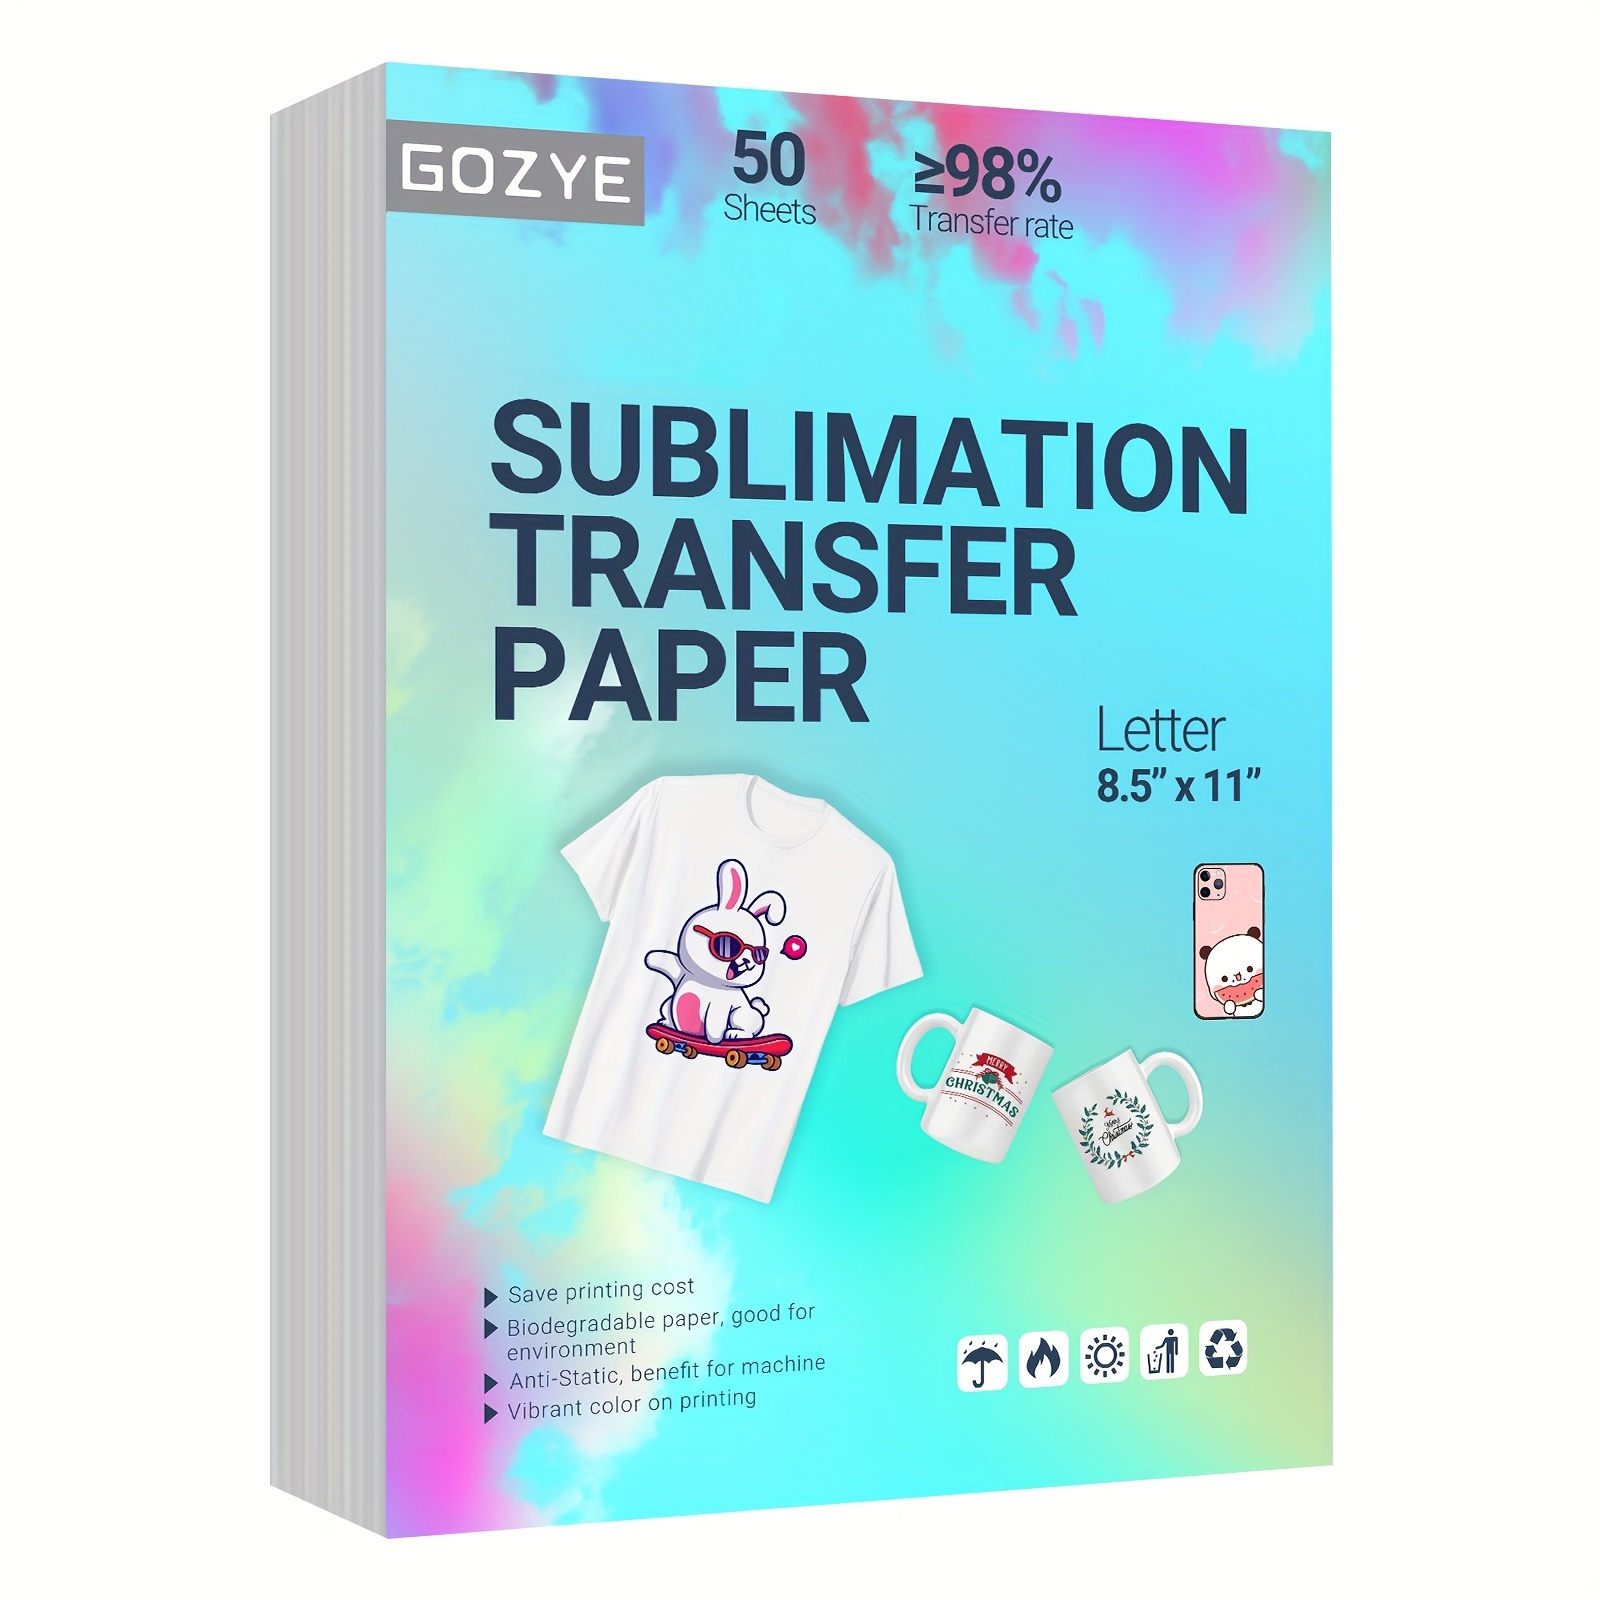 everything you need to know about transfer paper & sublimation 